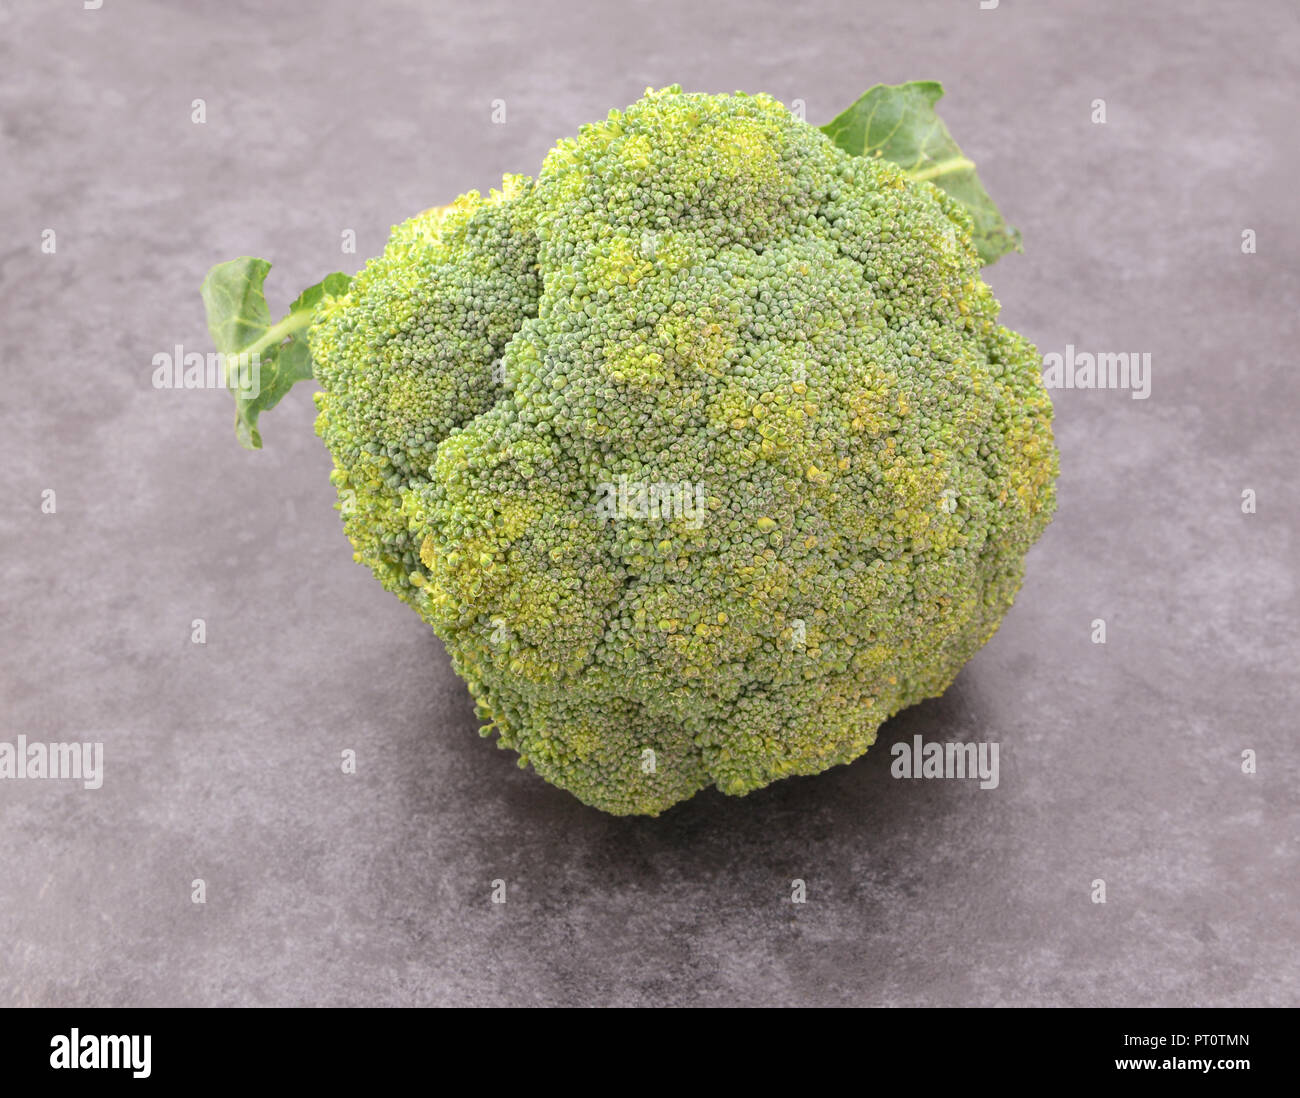 Head of calabrese broccoli beginning to spoil with yellowing florets, on a grey background Stock Photo